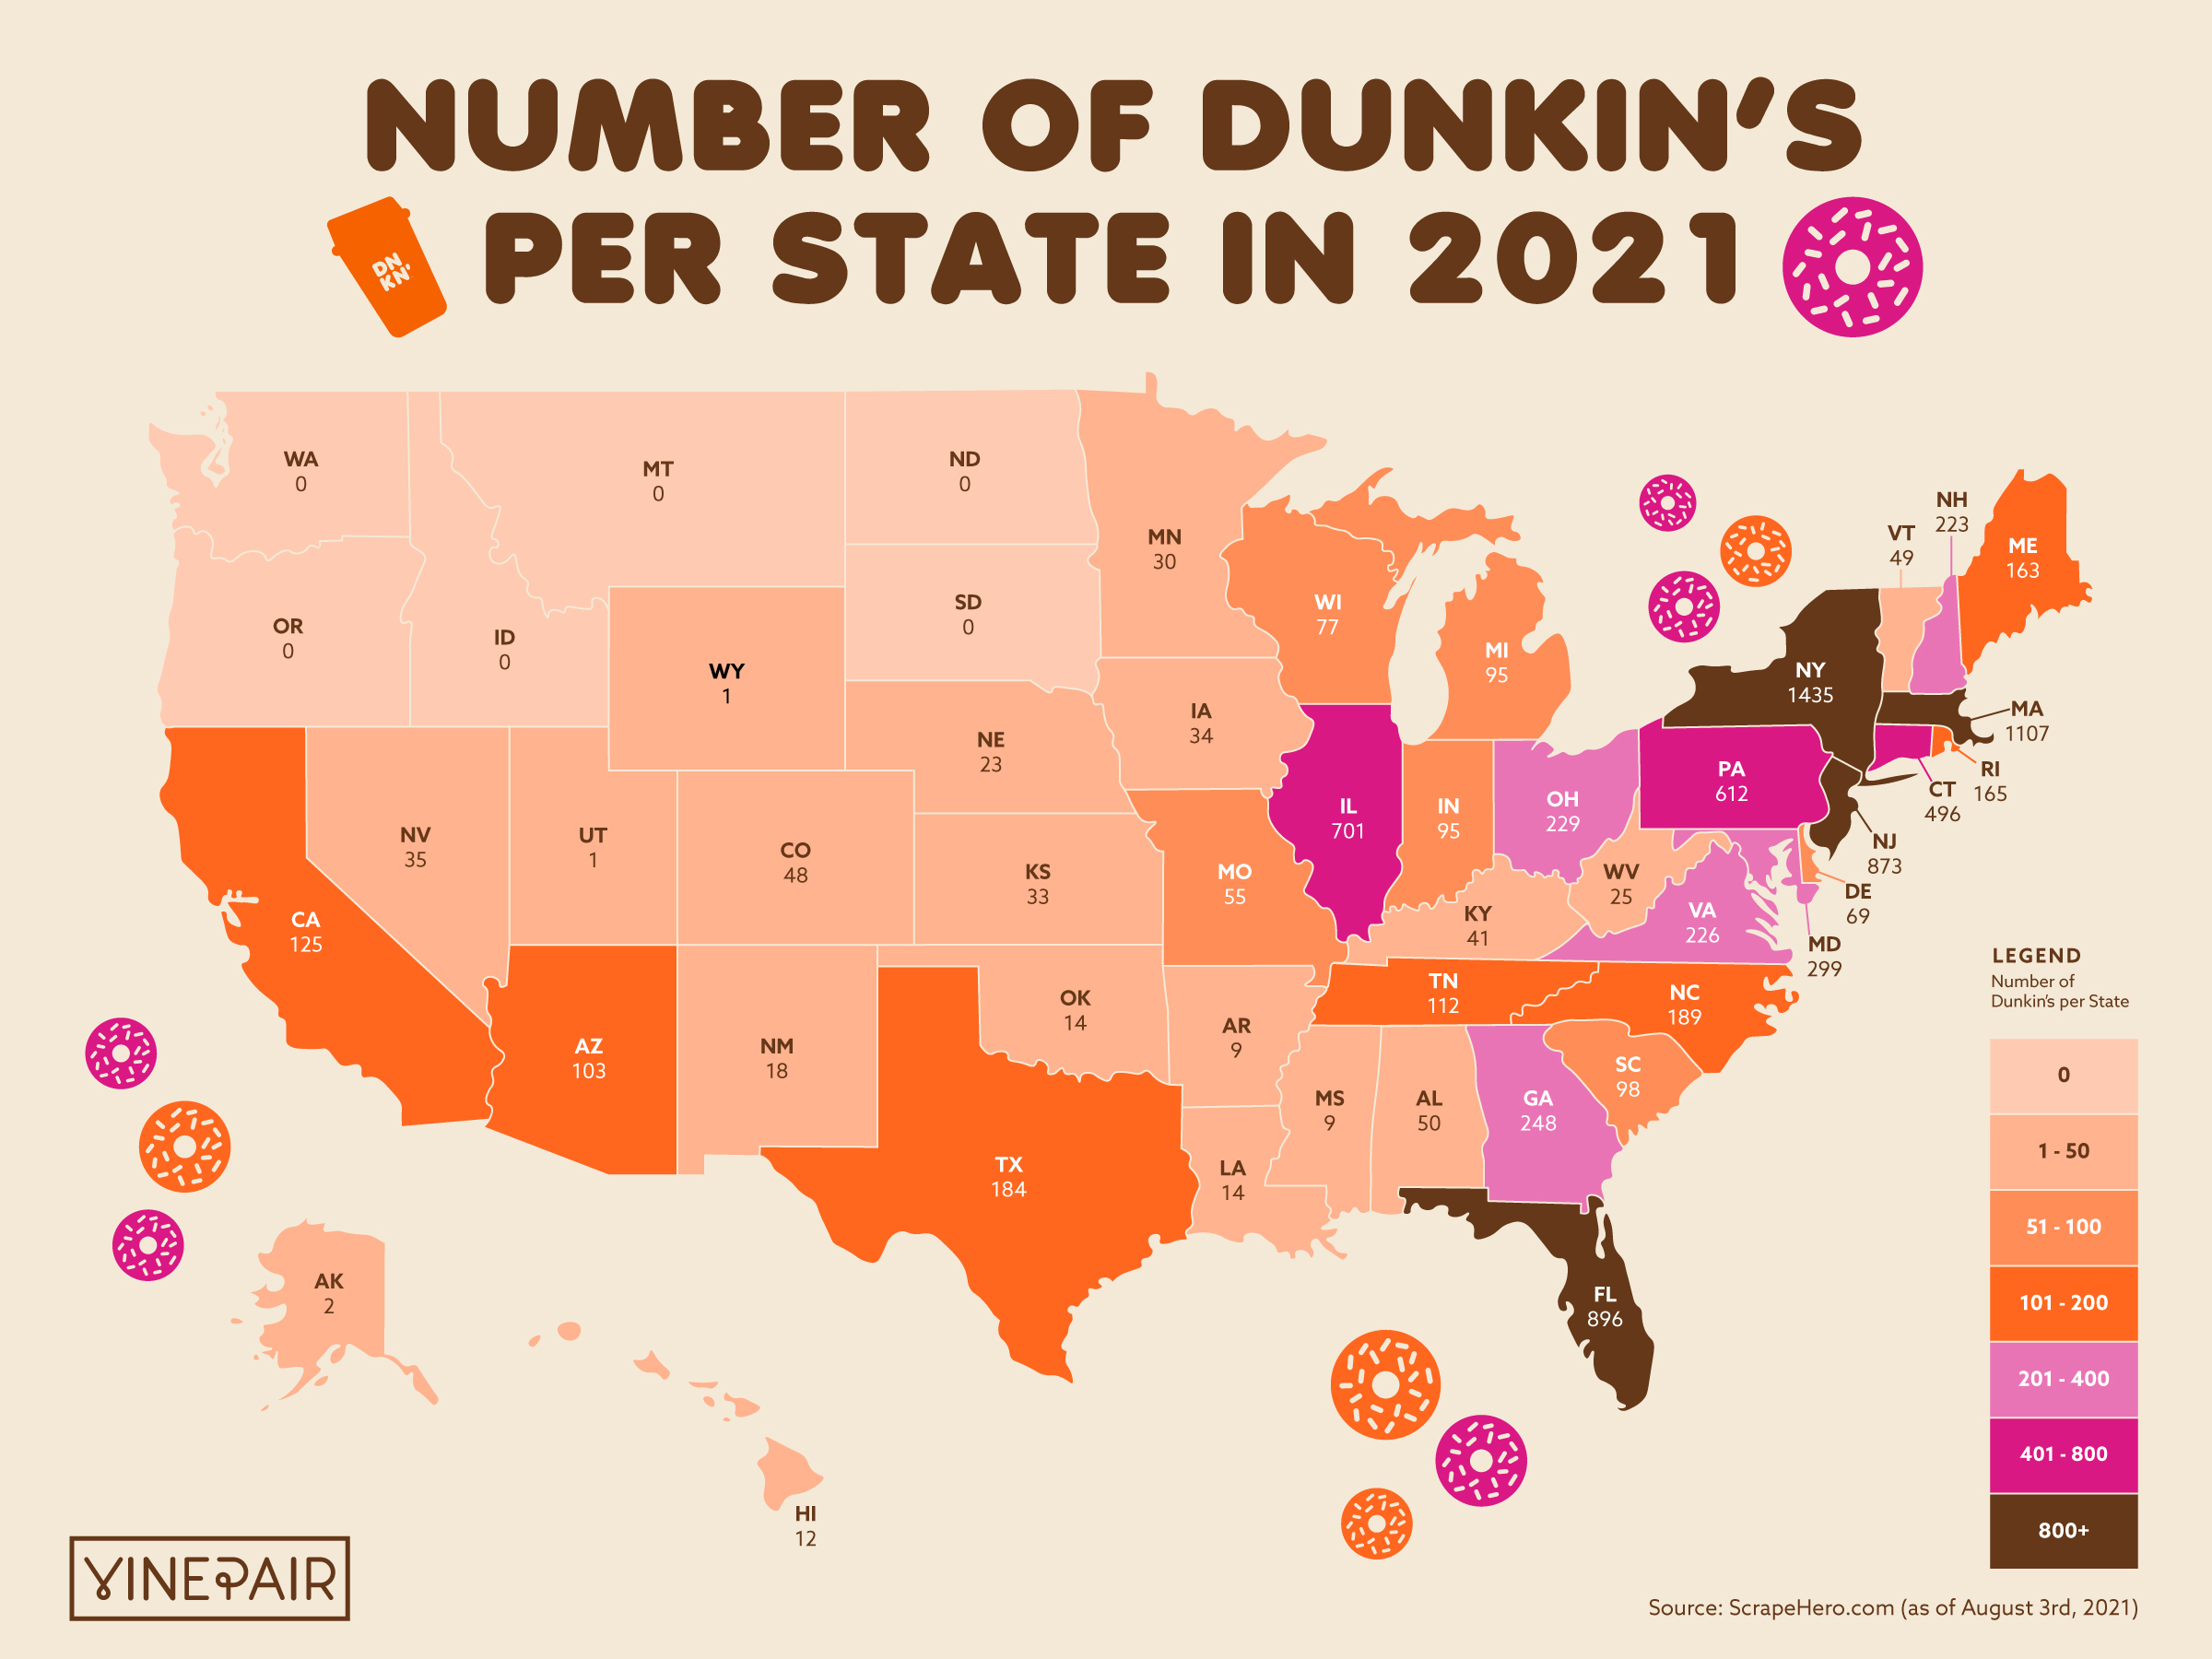 This map shows the number of Dunkin’ locations in every U.S. state